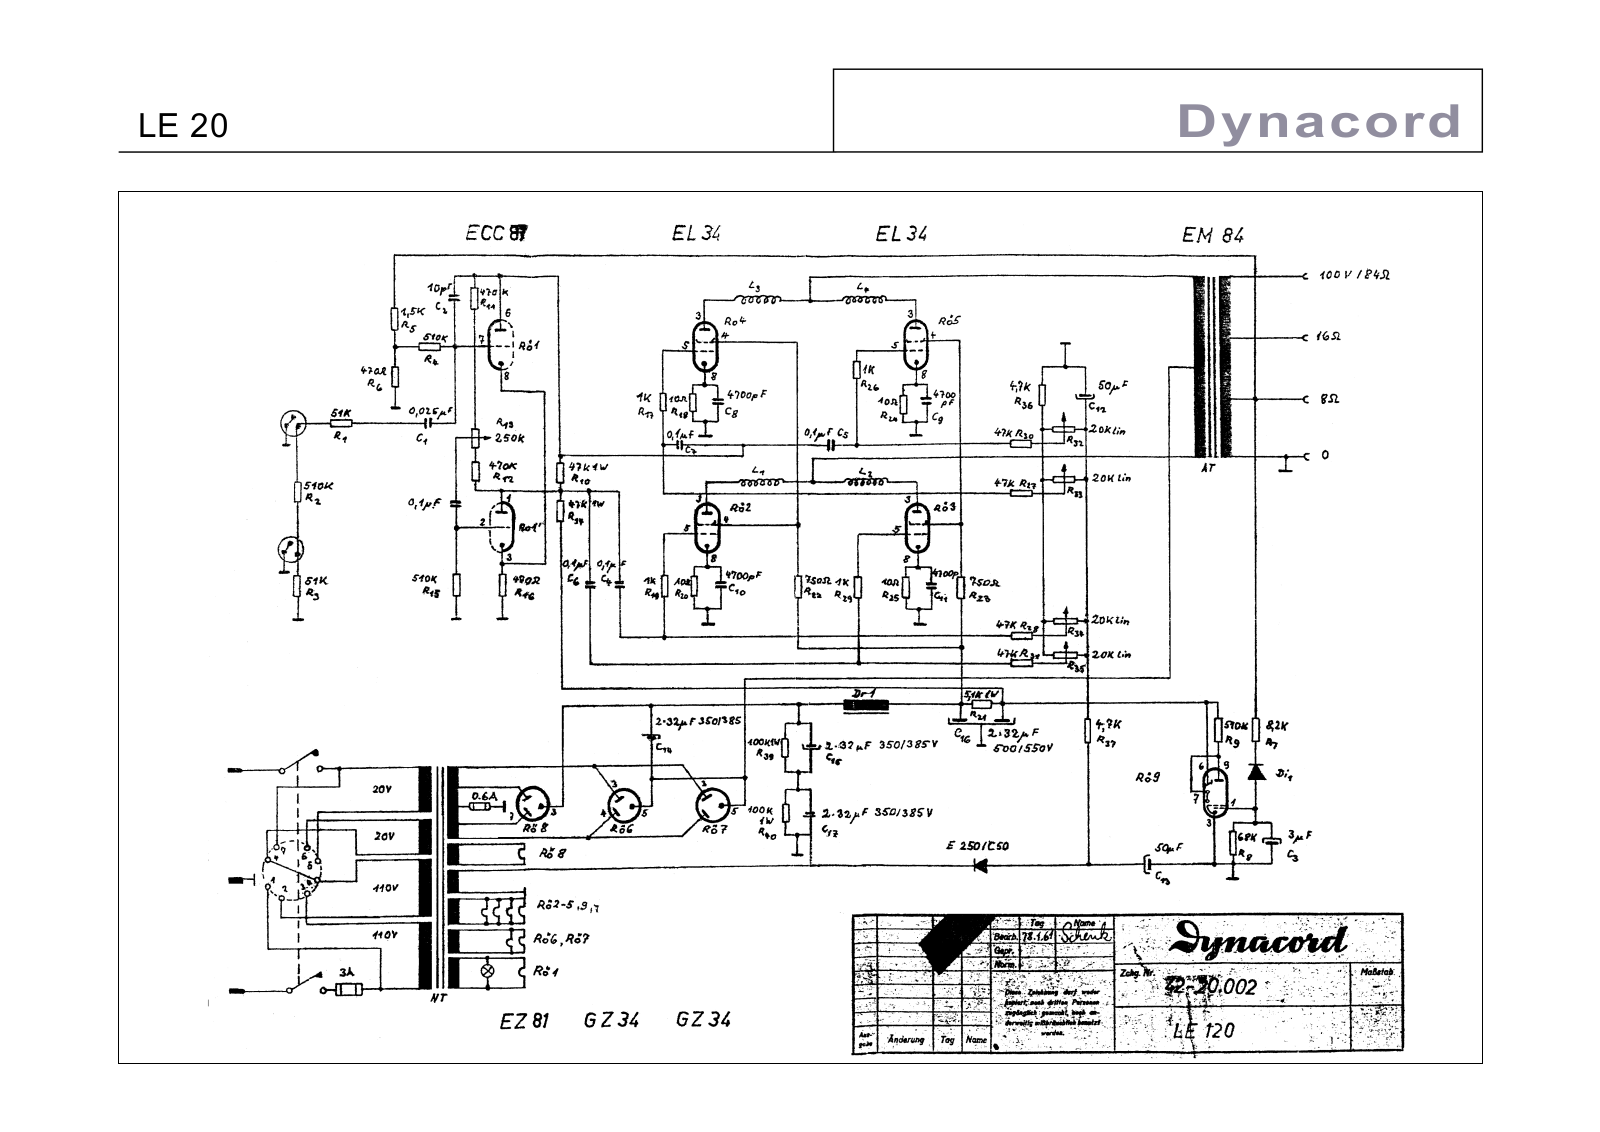 Dynacord le 20 schematic